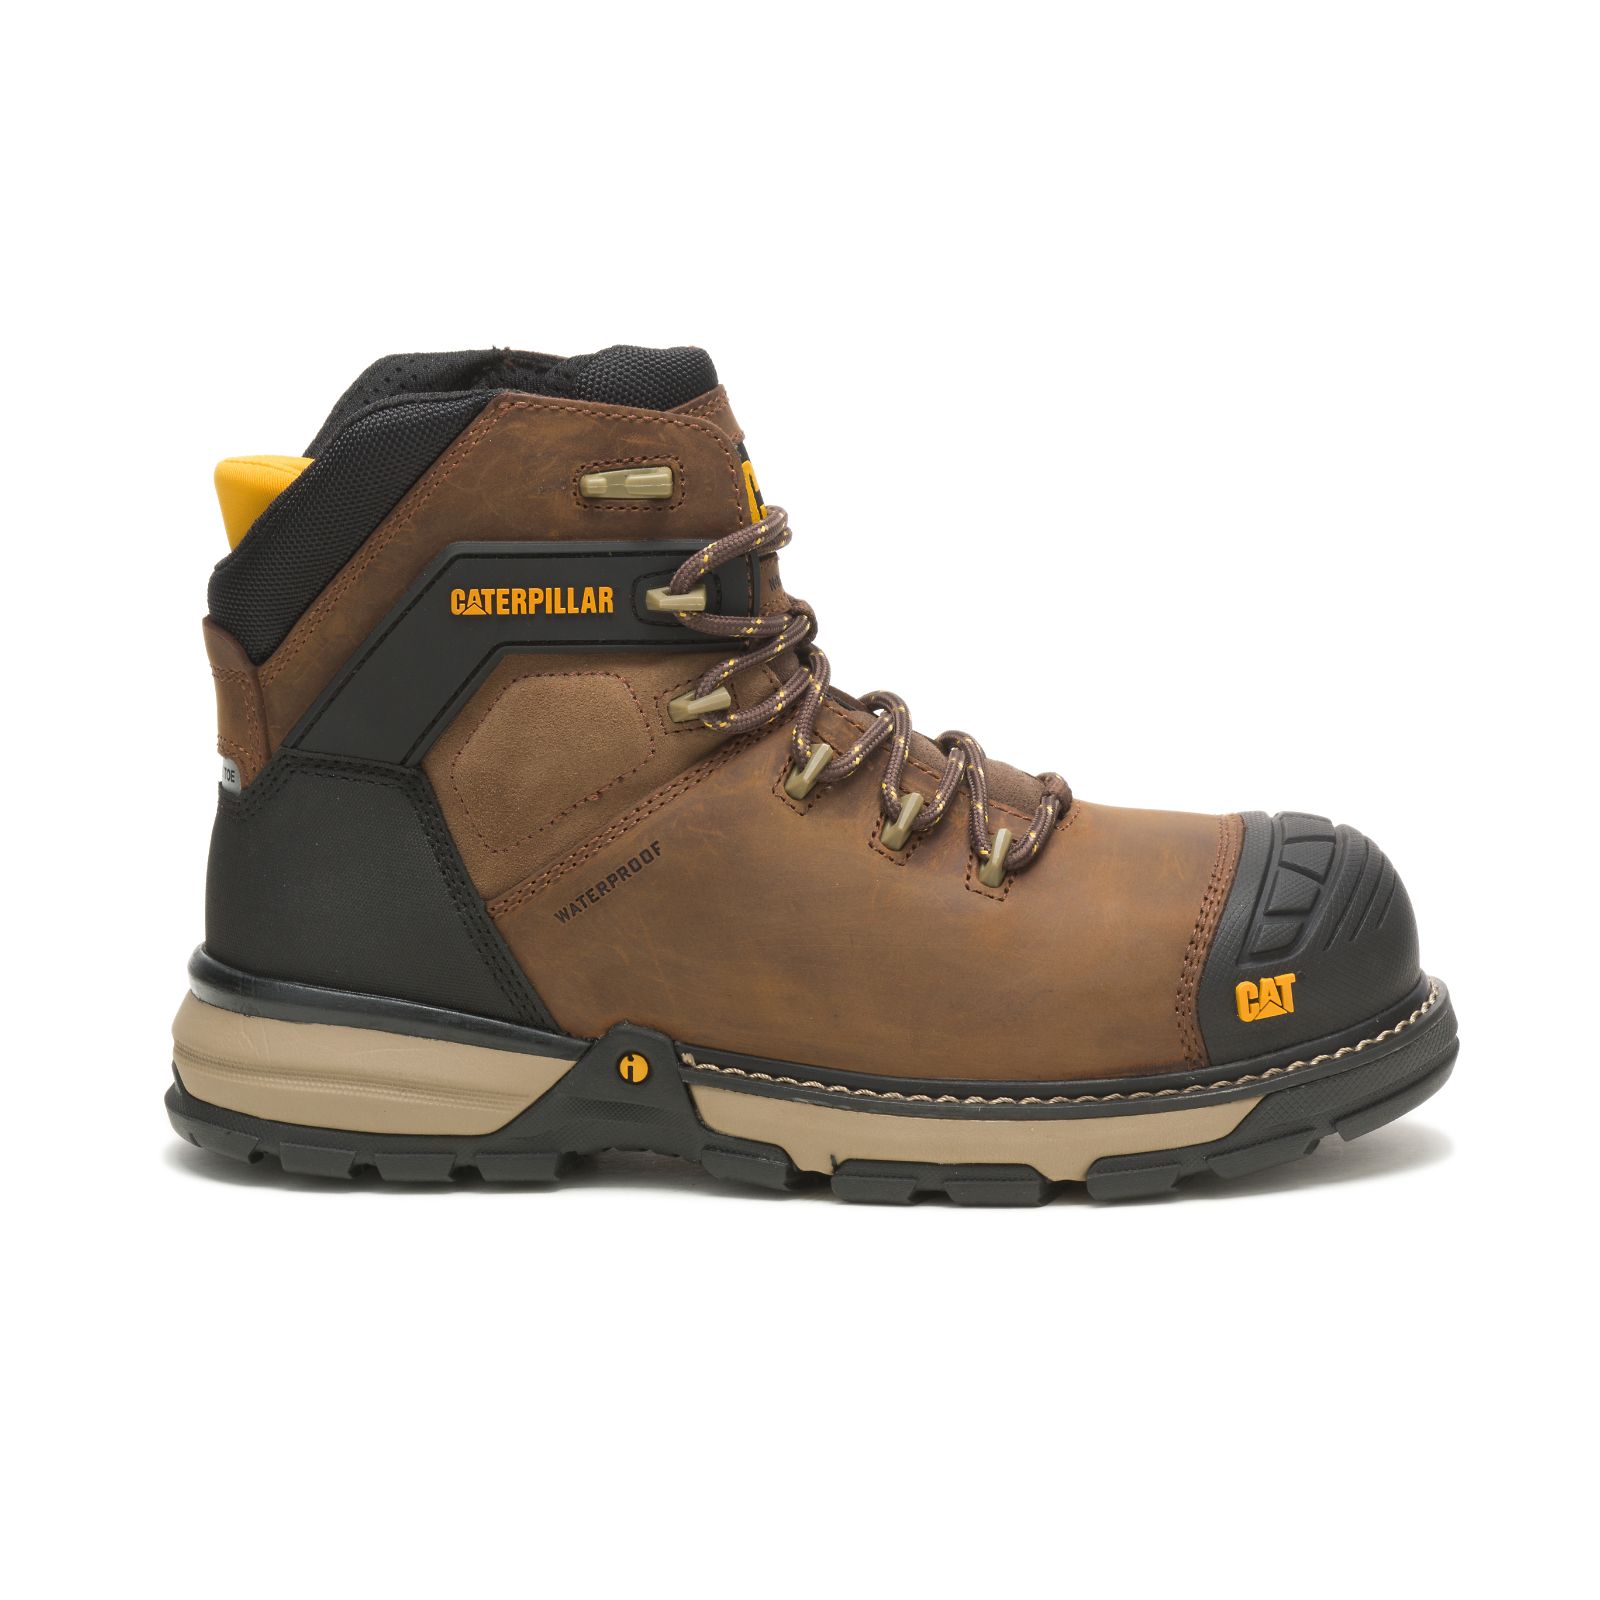 Caterpillar Safety Shoes India - Buy Caterpillar Boots Online India